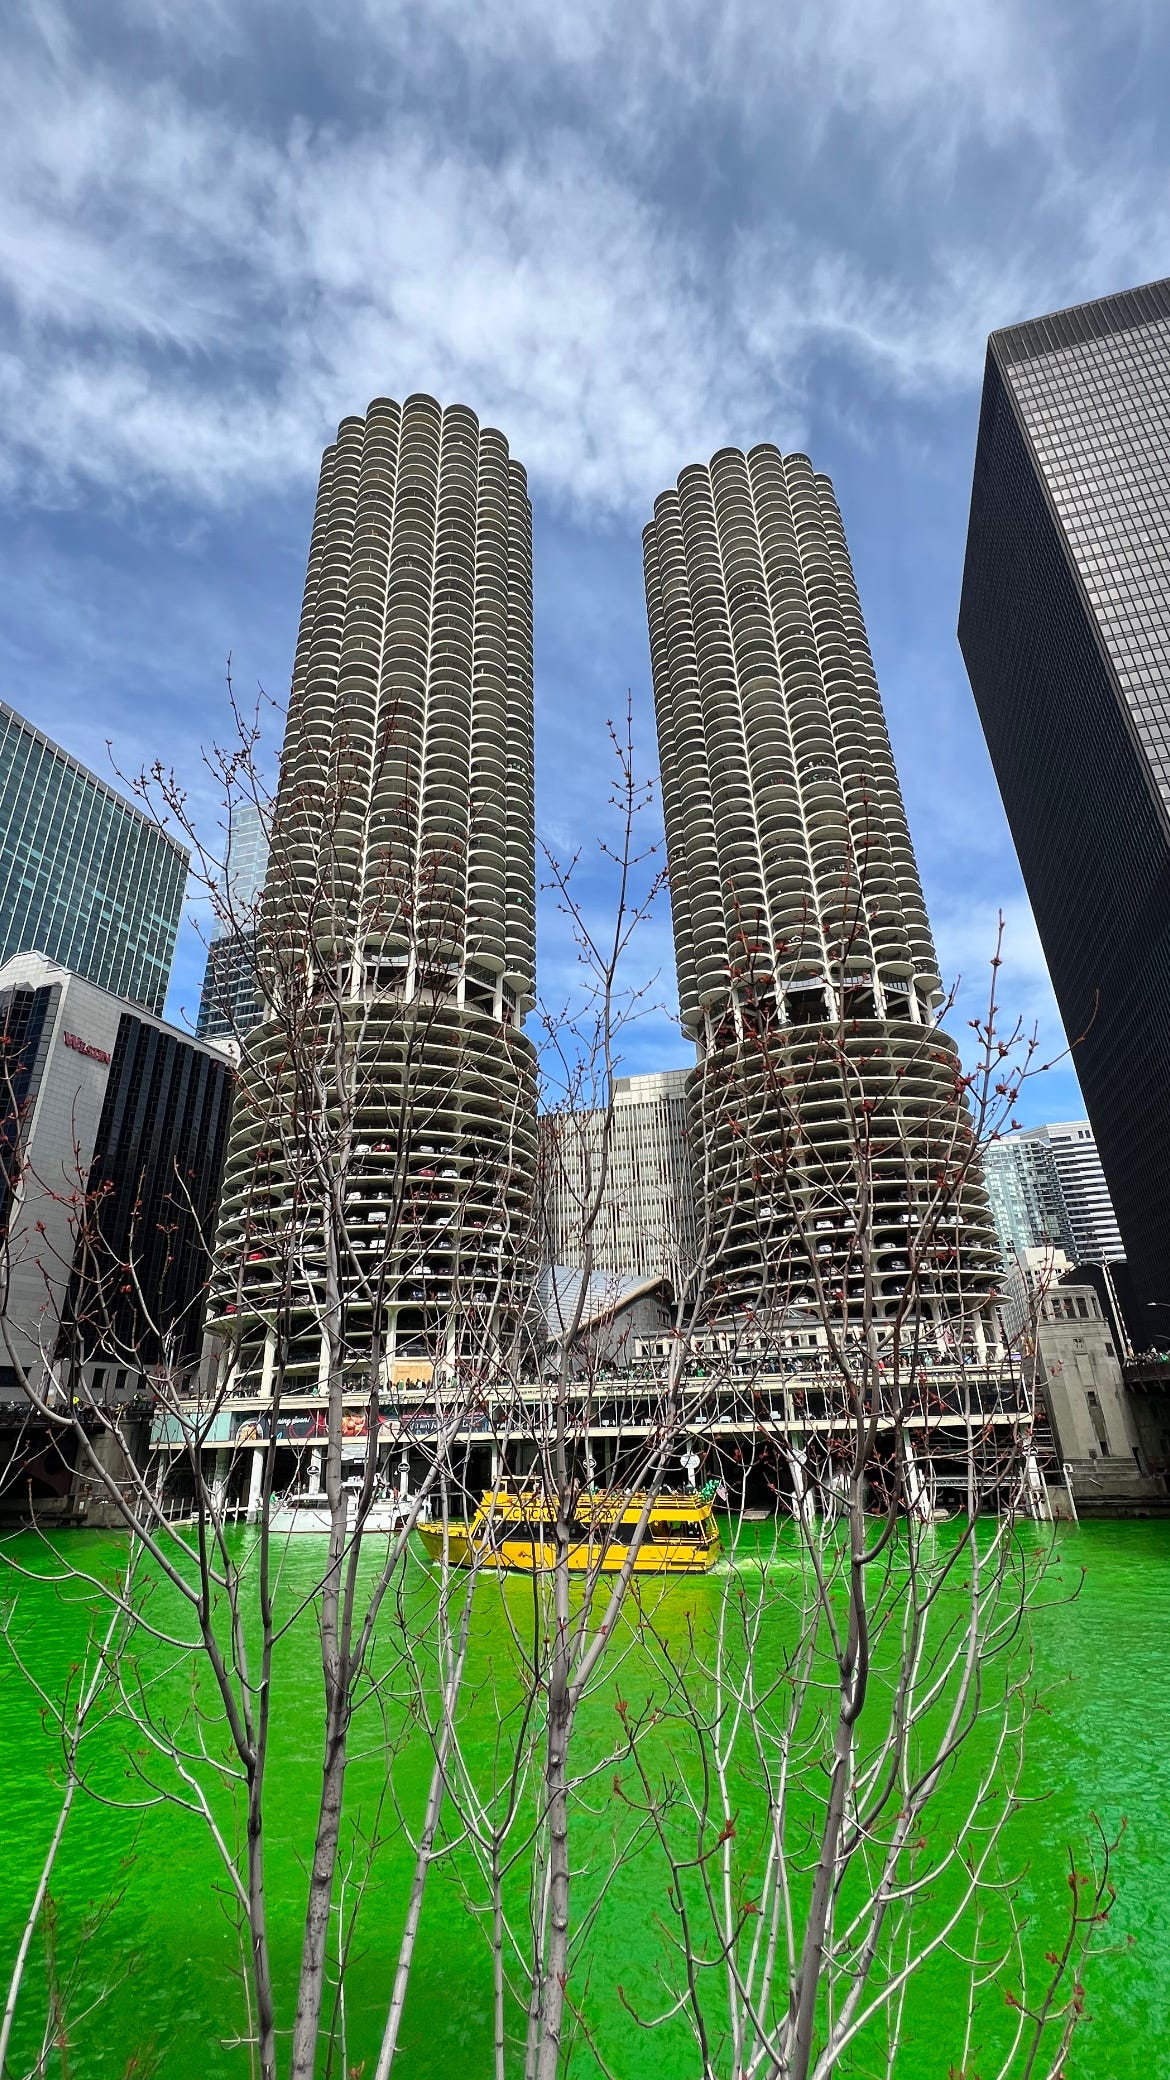 Green Chicago river in front of the corncob towers, with a tree at the bottom half of the image and a water taxi boat in the center